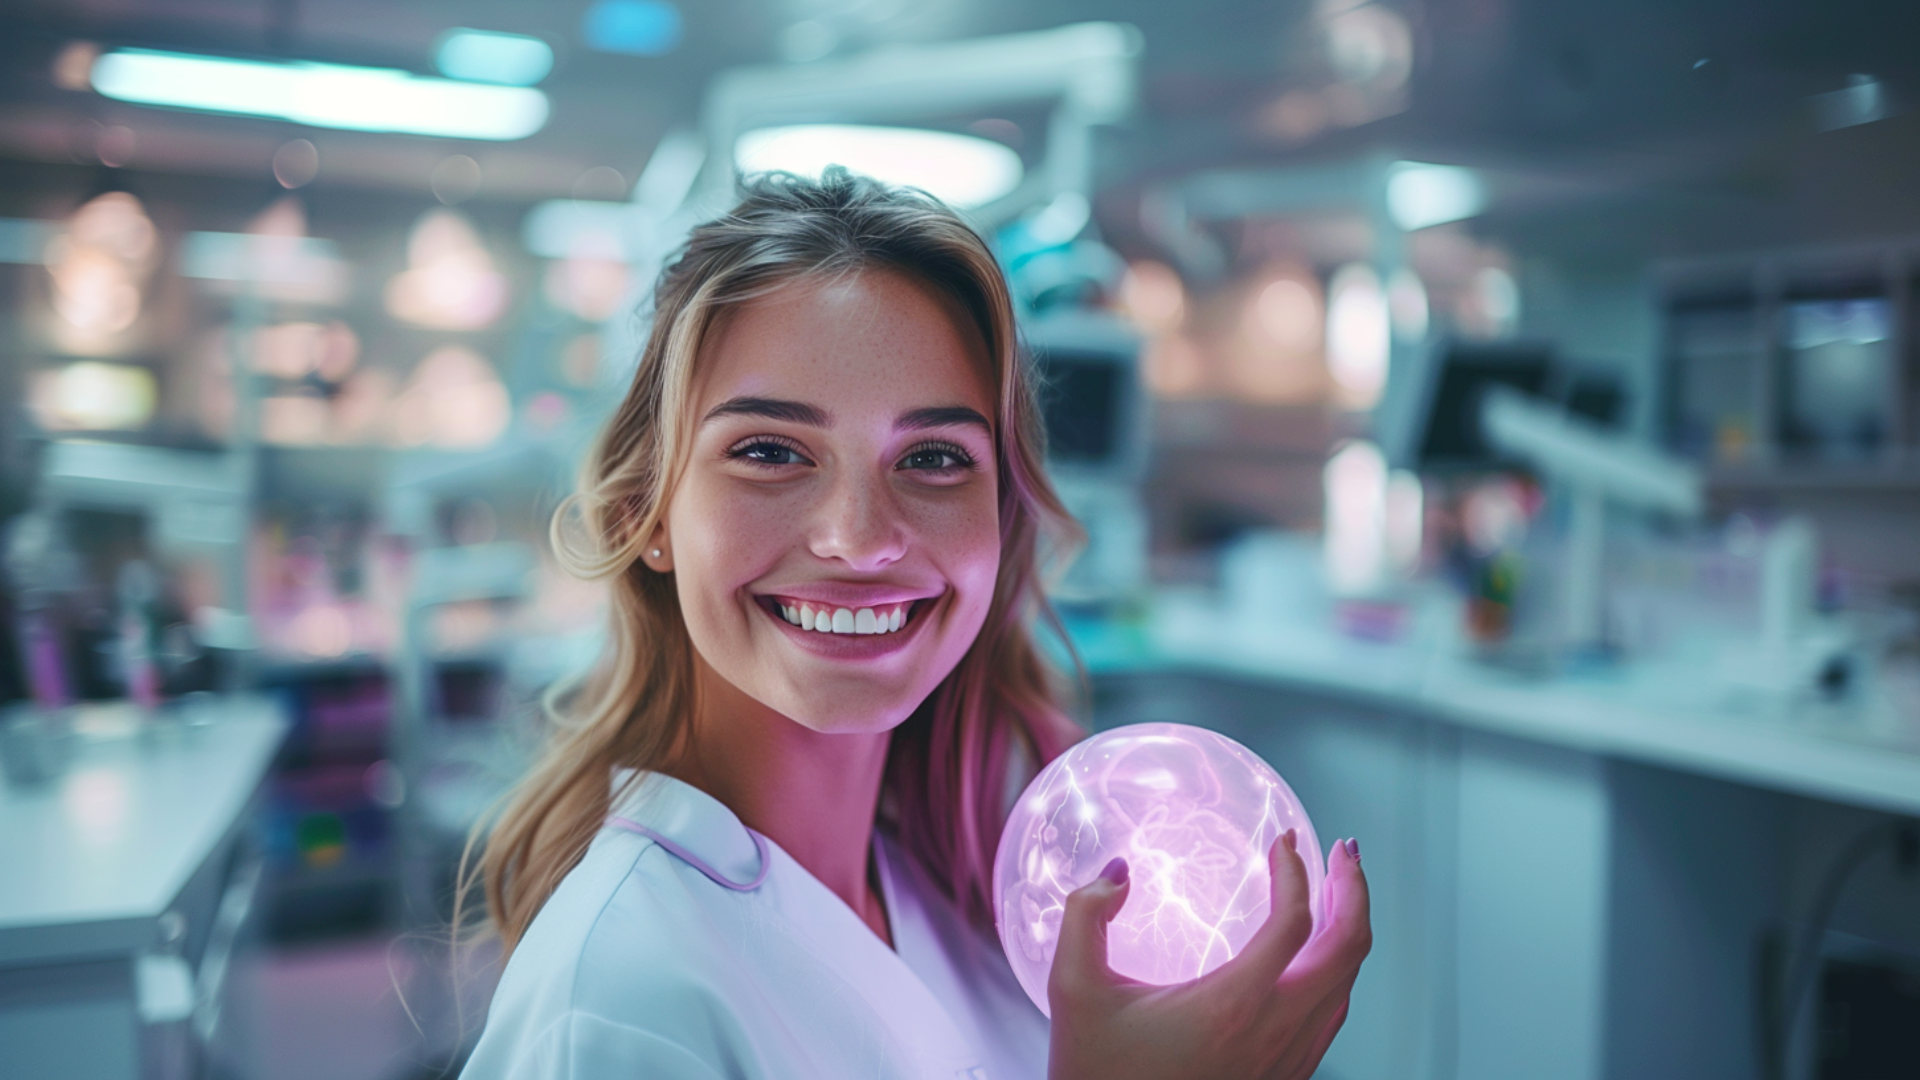 Dental hygienists are now using AI to become leaders at work.